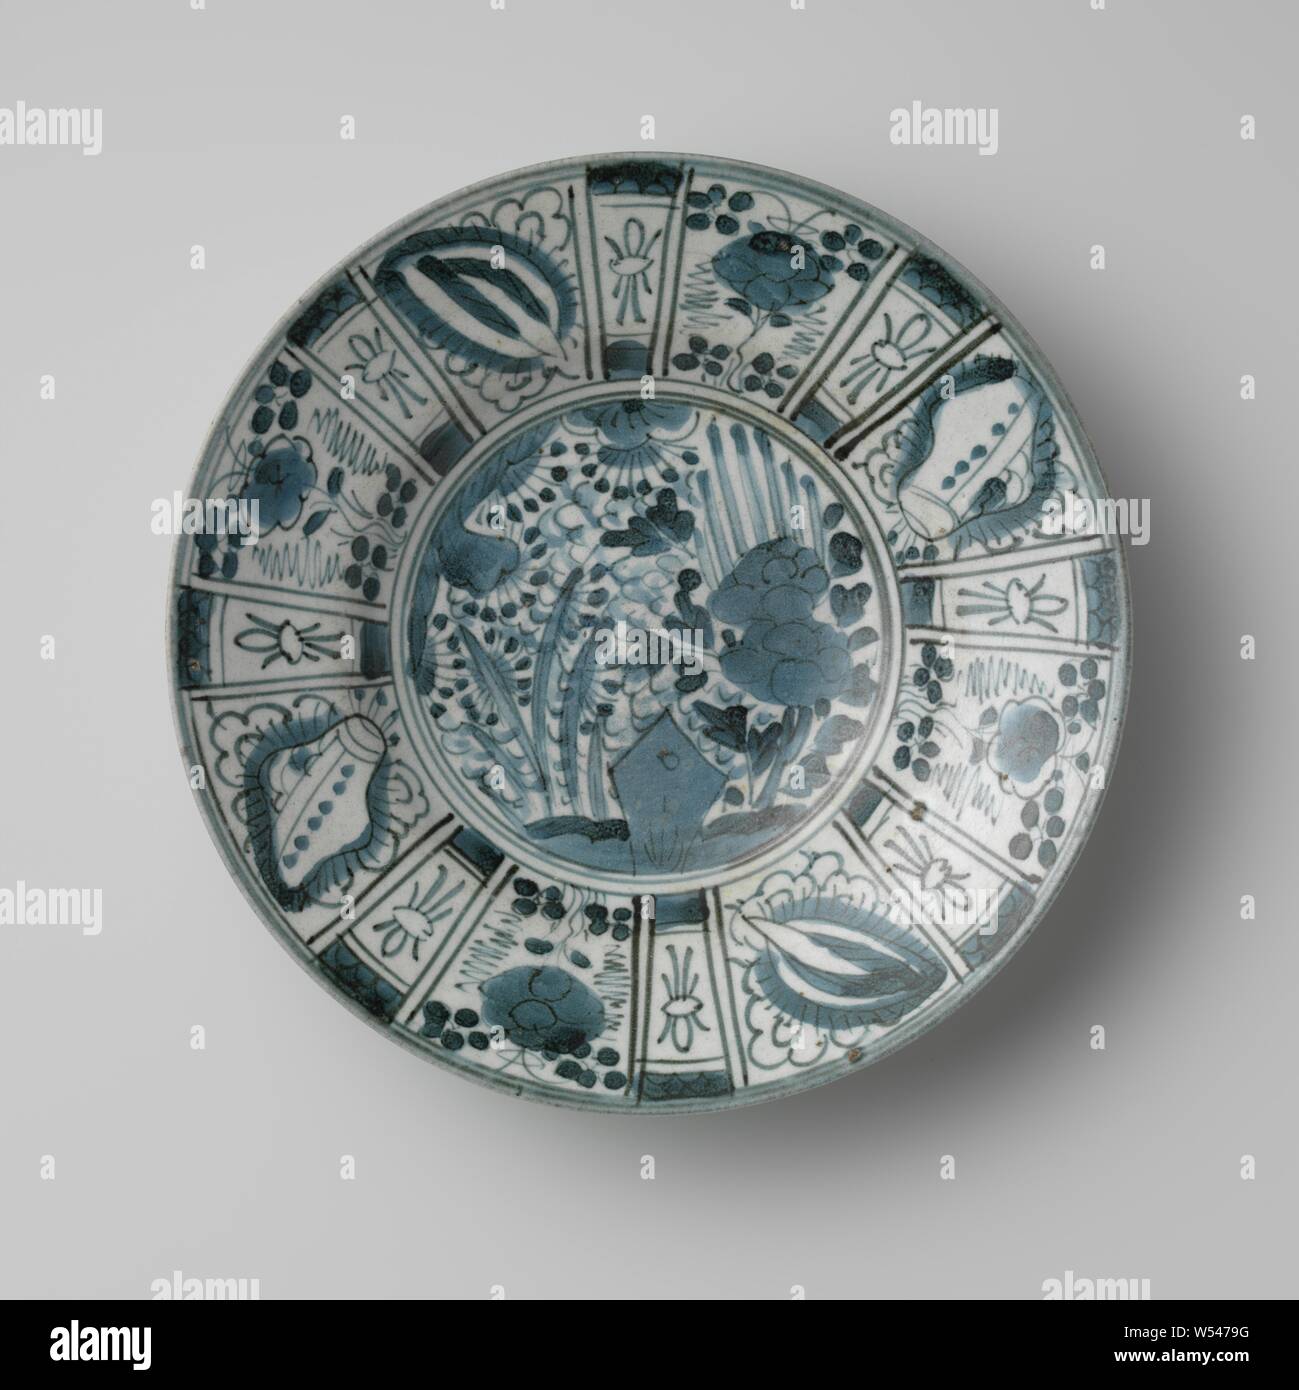 Plate Dish with flowering plants near a rock and a panel decoration, Deep porcelain plate with flat edge, painted in underglaze blue with on the shelf a dense decoration of plants with a stylized rock, on the border surfaces with brush motifs and alternating flowers and valuables. Four proen on the bottom, chip in the foot ring. Decoration following the Chinese kraak porcelain. Blue White., anonymous, Japan, c. 1700 - c. 1799, Edo-period (1600-1868), porcelain (material), glaze, cobalt (mineral), vitrification, h 5.5 cm d 27.3 cm d 12.4 cm Stock Photo